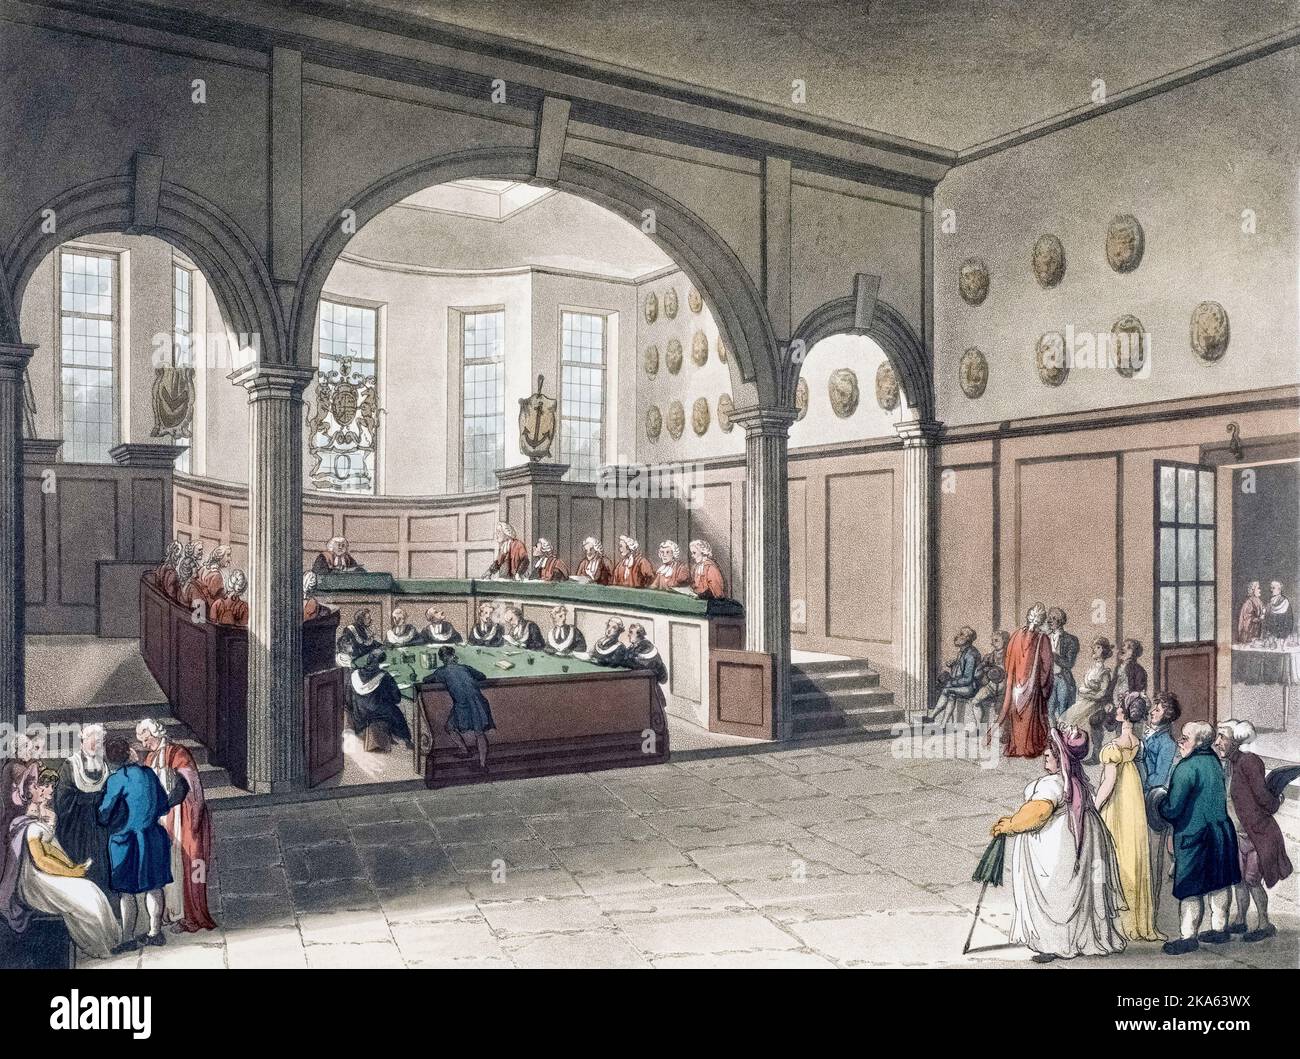 Doctors' Commons.  Circa 1808.  After a work by August Pugin and Thomas Rowlandson in the Microcosm of London, published in three volumes between 1808 and 1810 by Rudolph Ackermann.   Pugin was the artist responsible for the architectural elements in the Microcosm pictures; Thomas Rowlandson was hired to add the lively human figures. Stock Photo